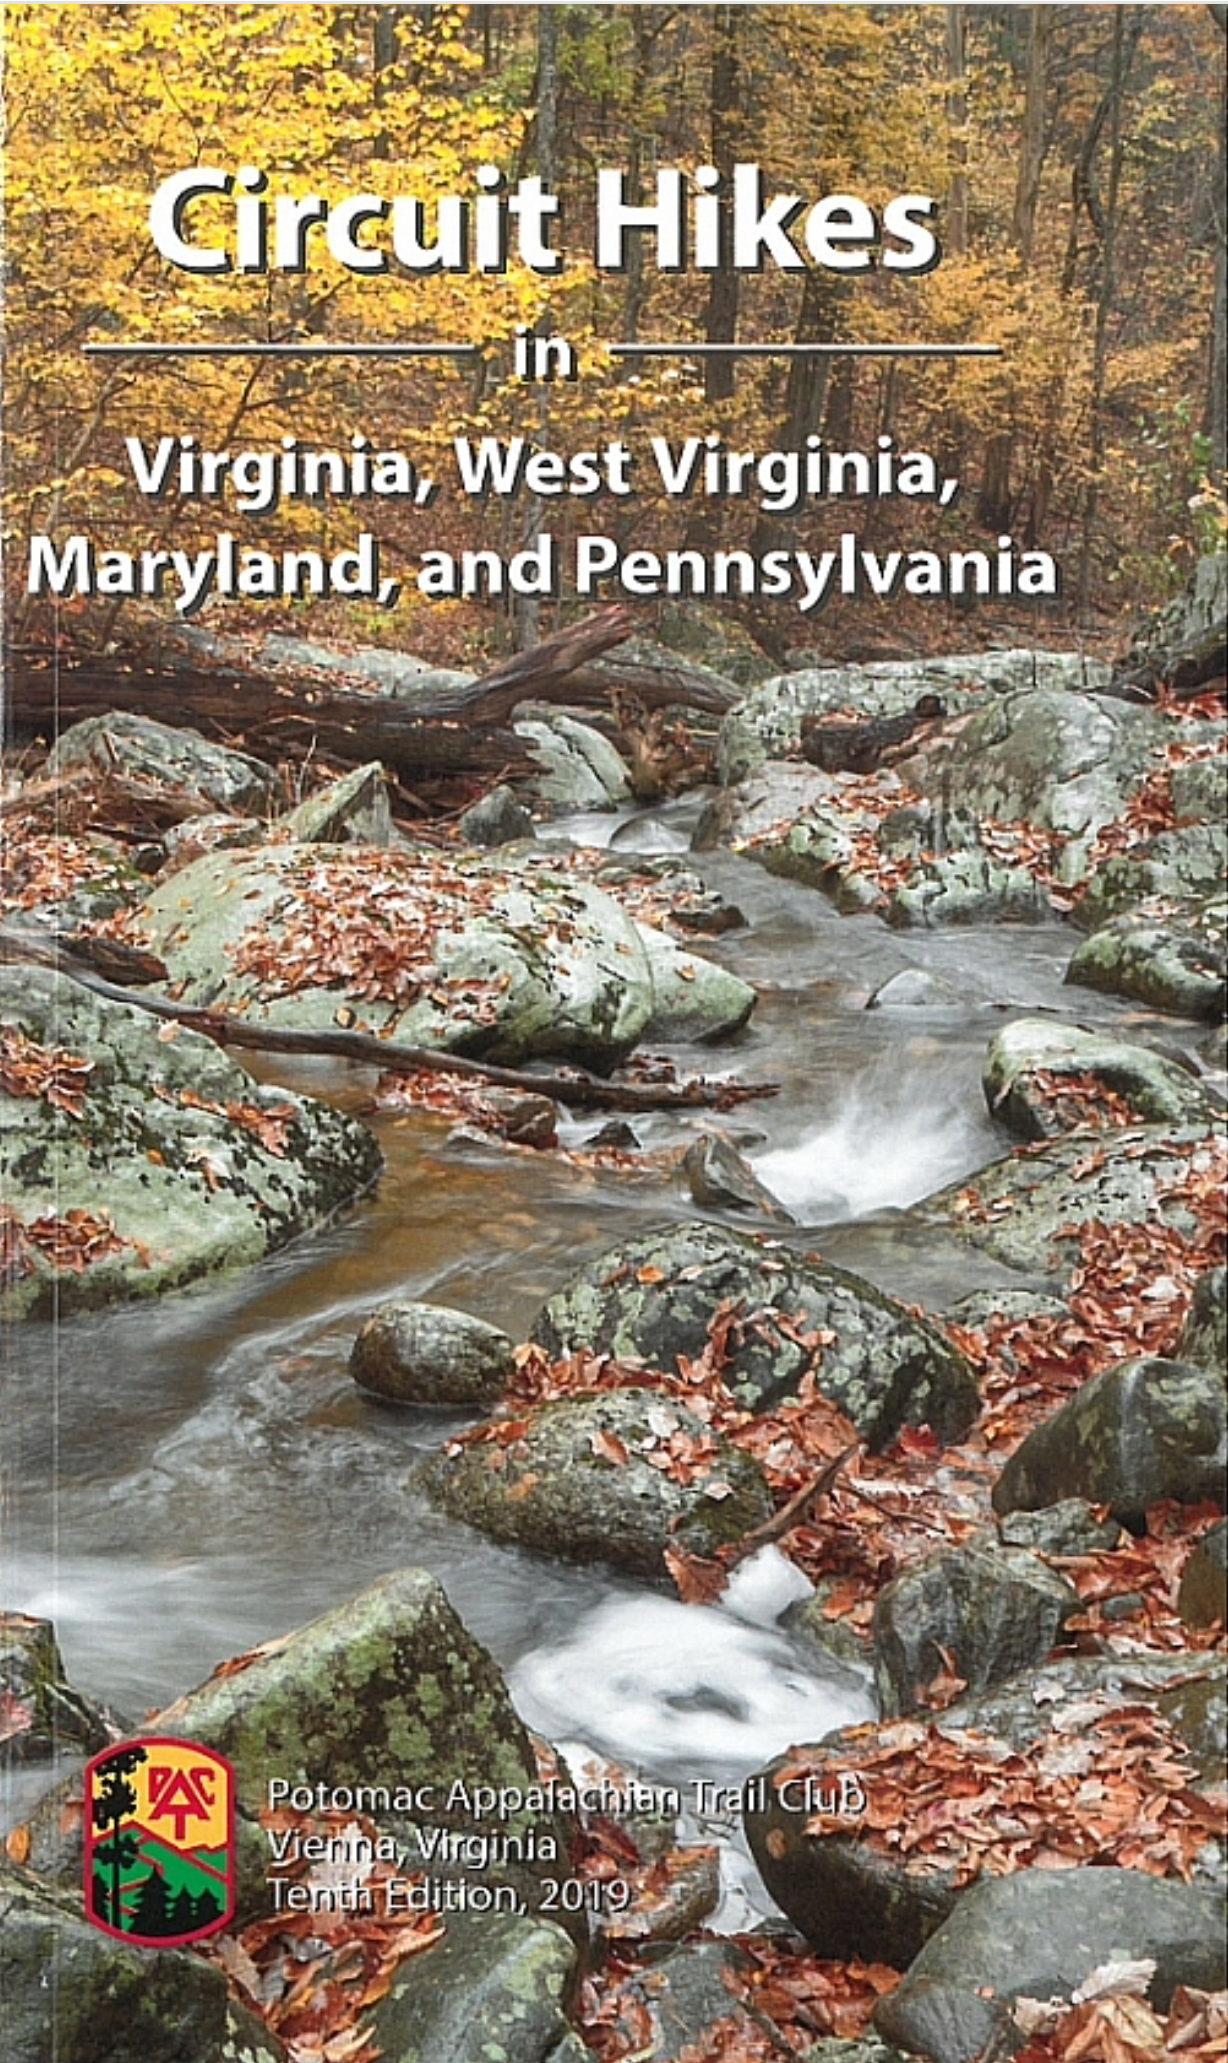 A PATC guide book showing circuit hike trails in Virginia, West Virginia, Maryland, and Pennsylvania.